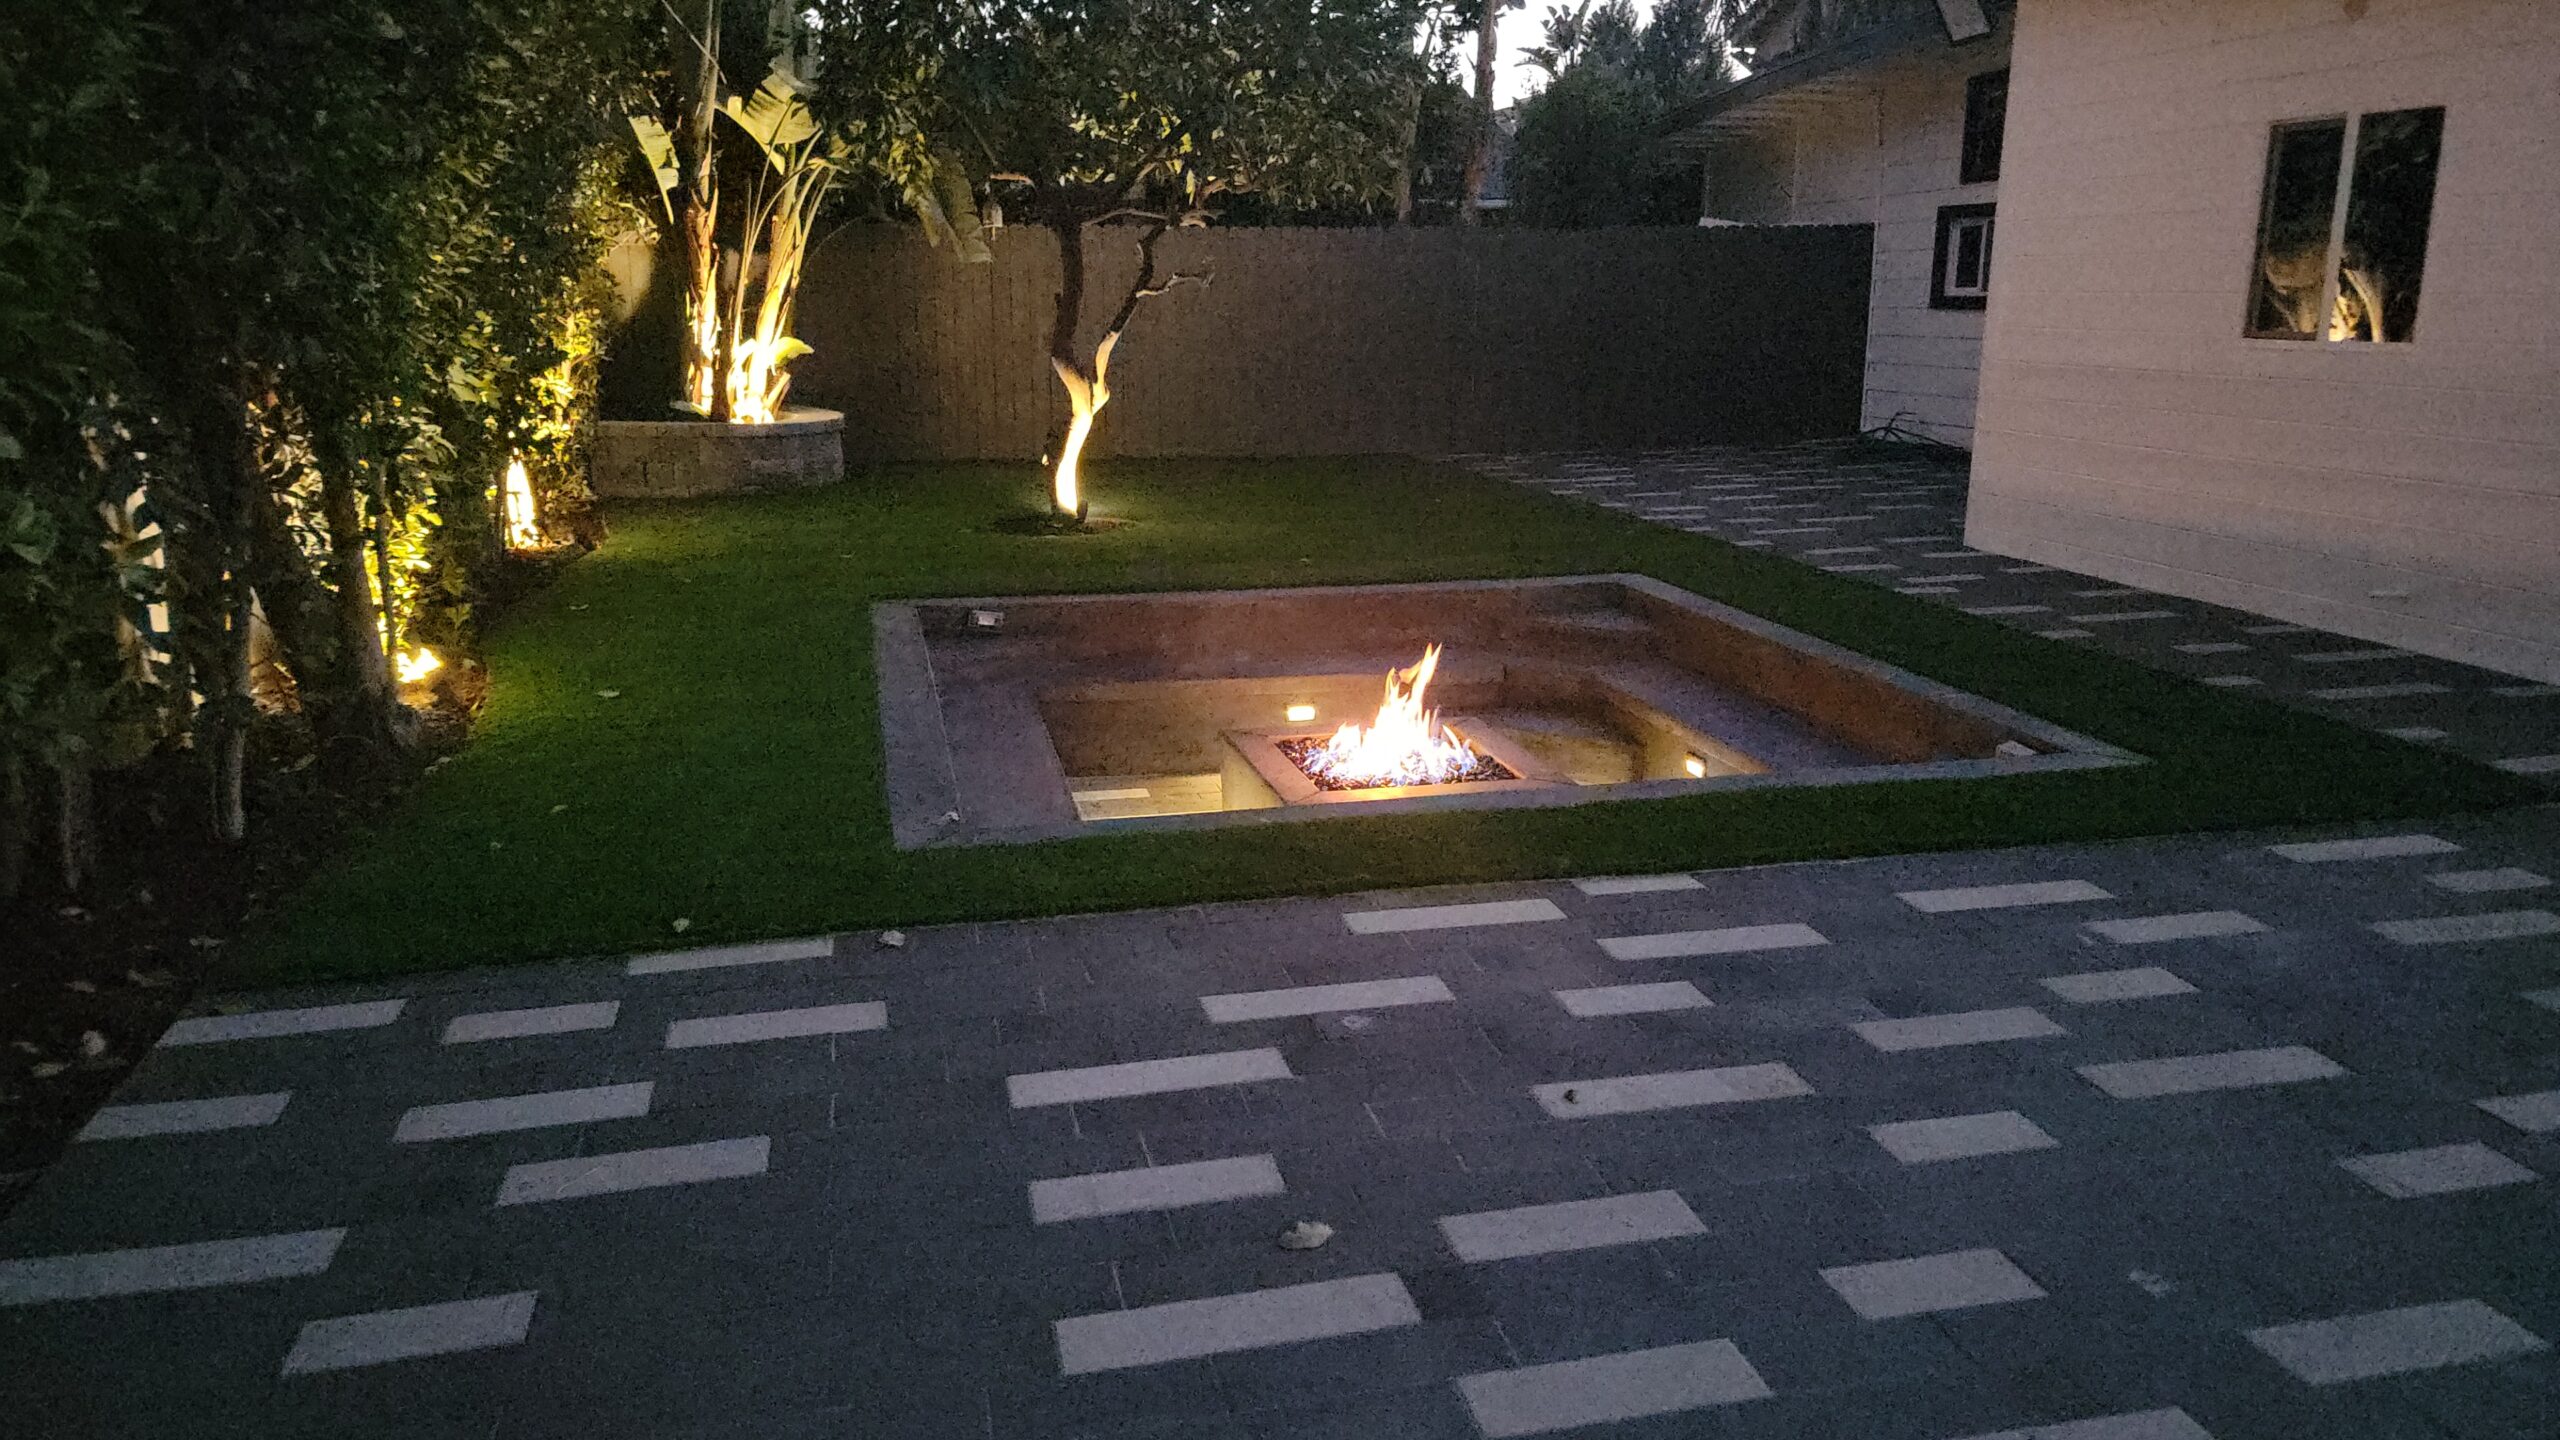 Backyard renovation and landscape design including a fire pit, paver installation and patio in the los angeles area.